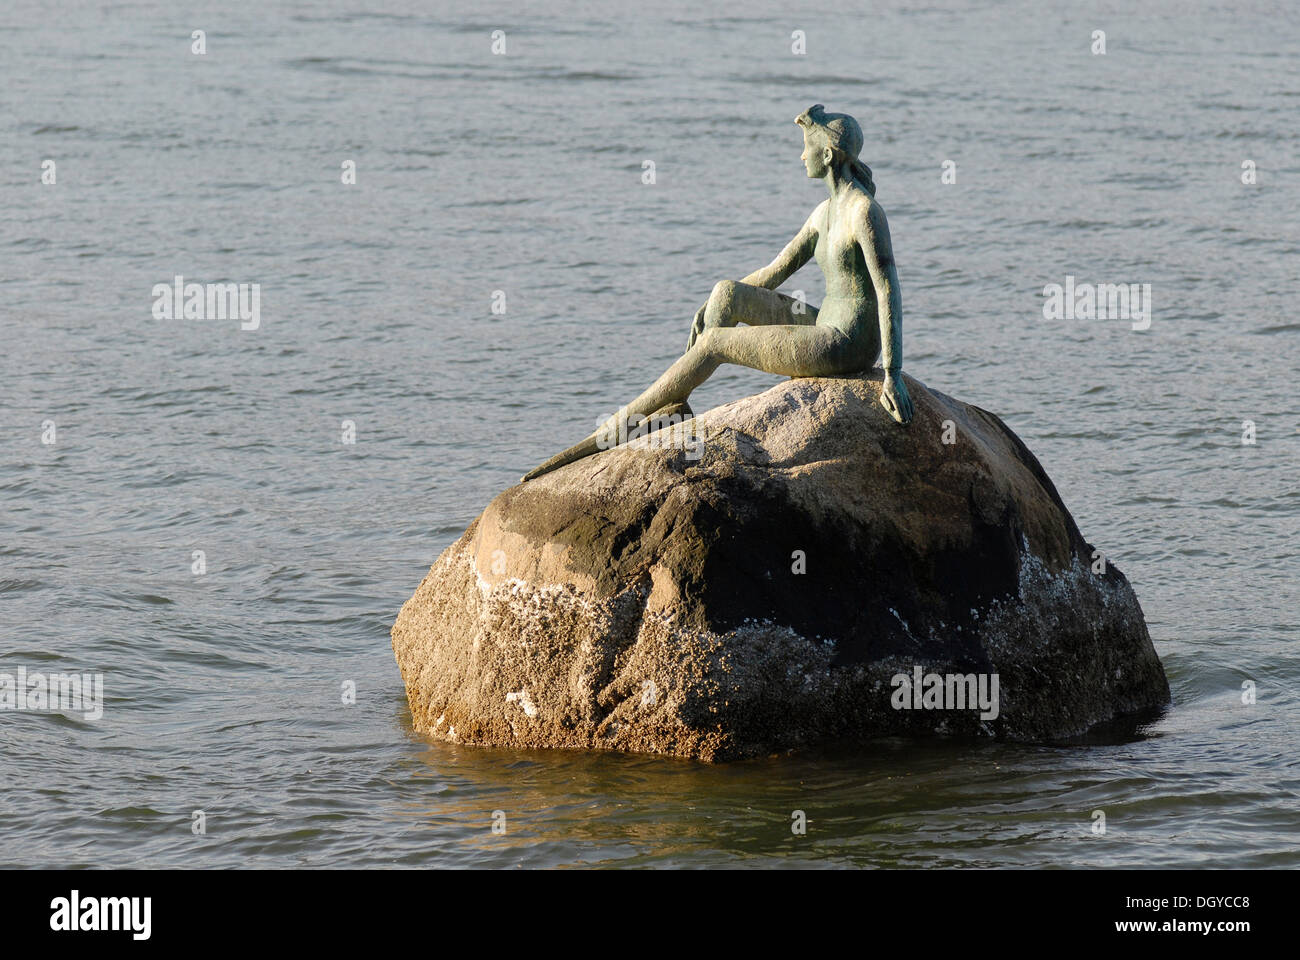 Girl In Wet Suit, a modern mermaid statue, Stanley Park, Vancouver, British Columbia, Canada, North America Stock Photo